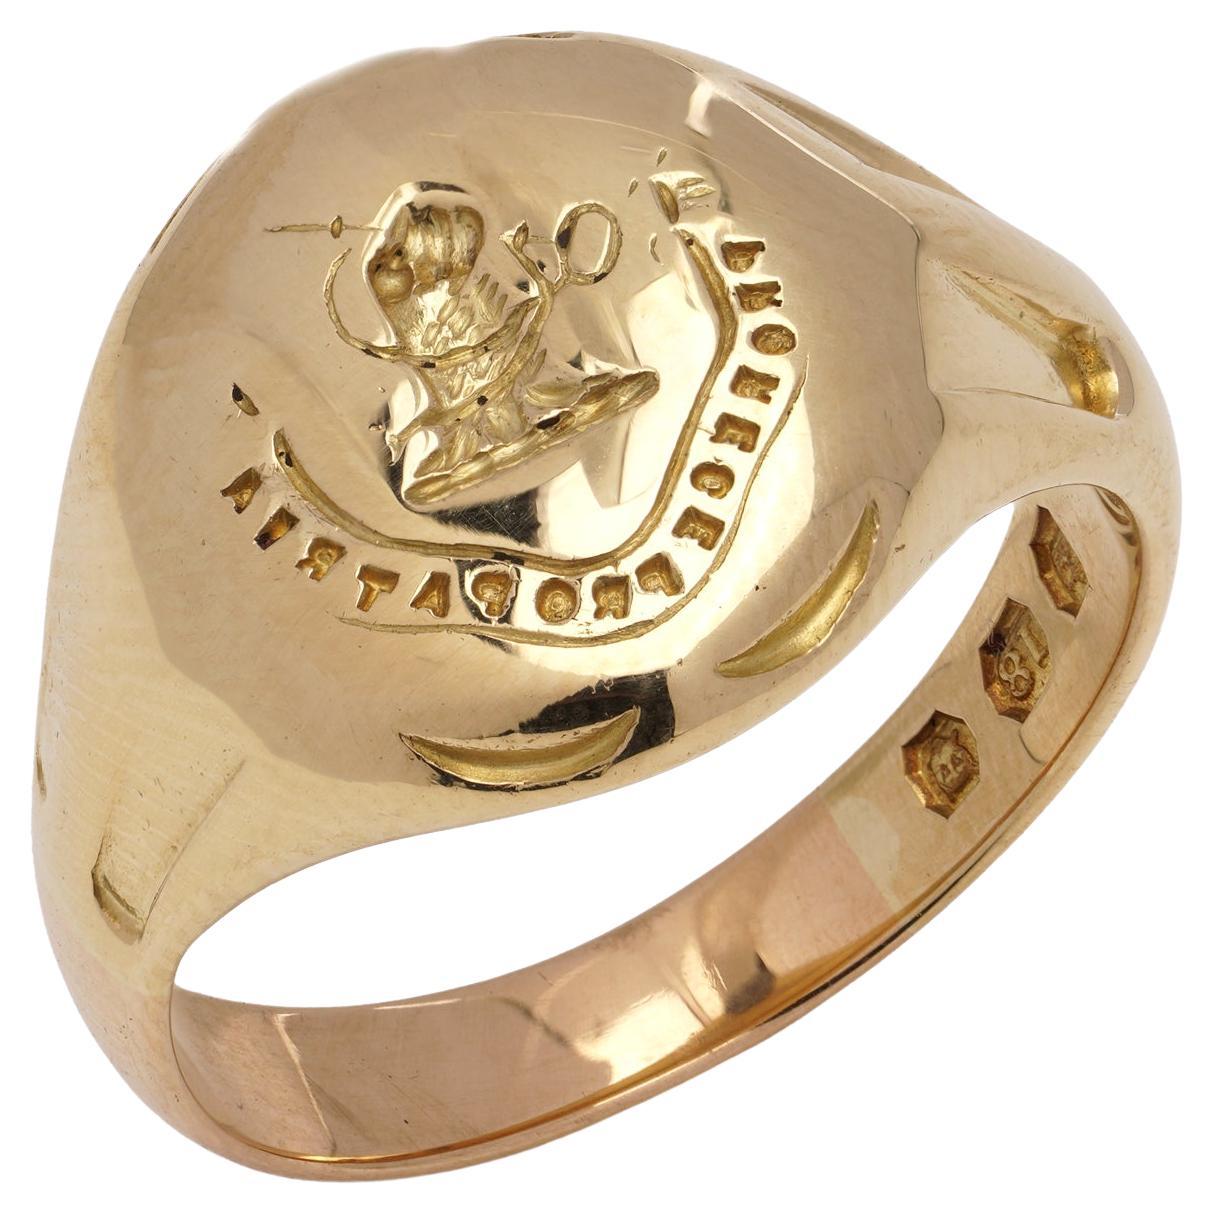 18kt Gold Signet Ring with Latin Inscription 'For King and Country'